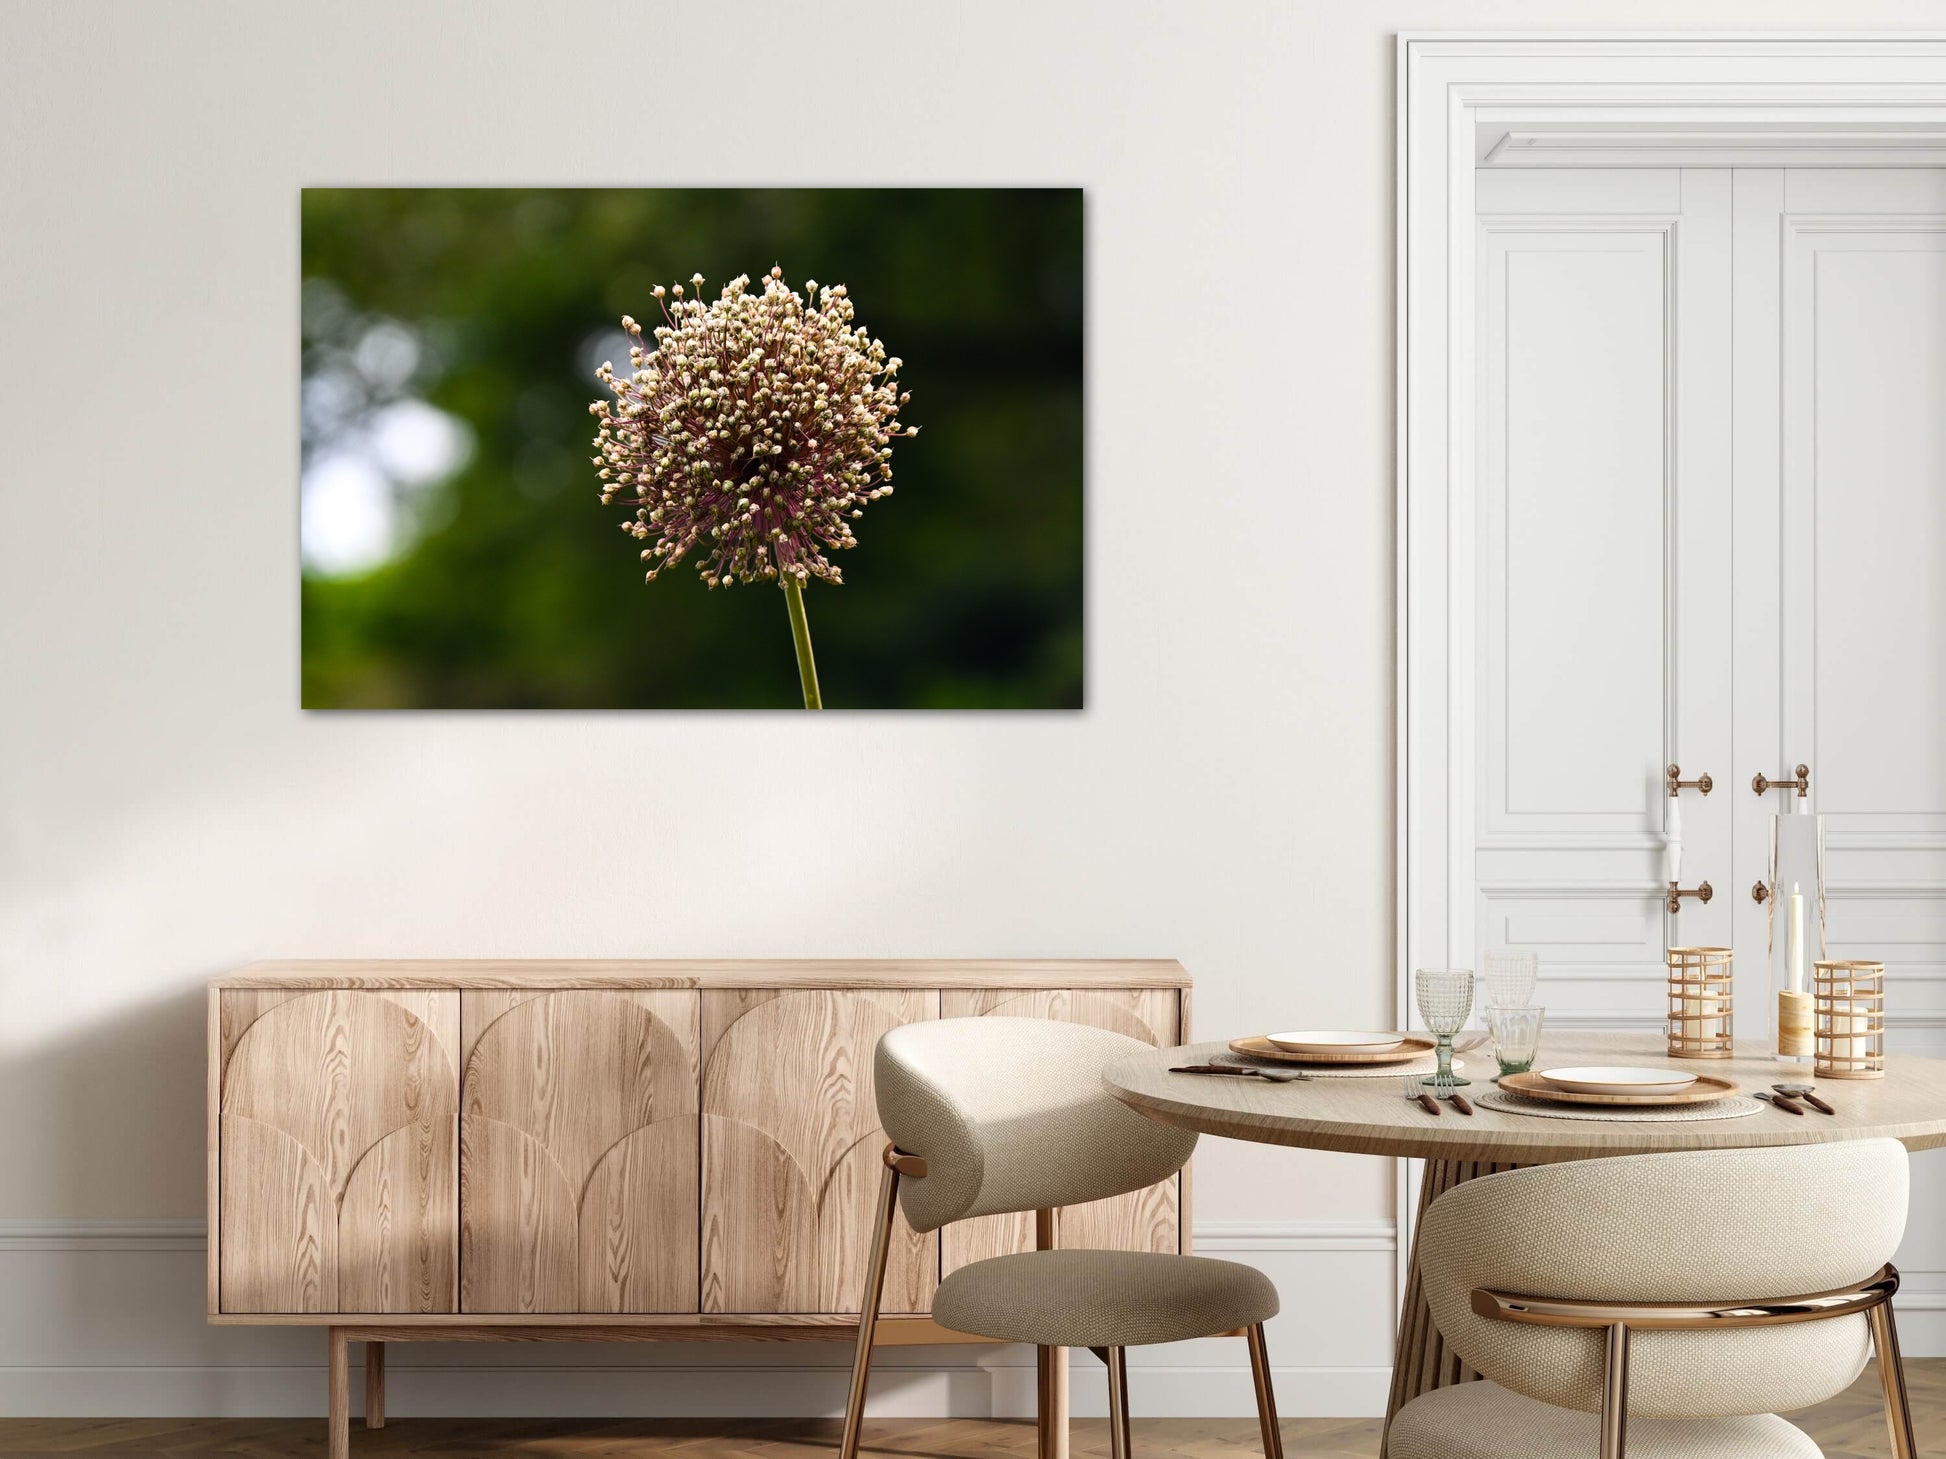 Travel nature flower garden photography canvas print on dining room wall